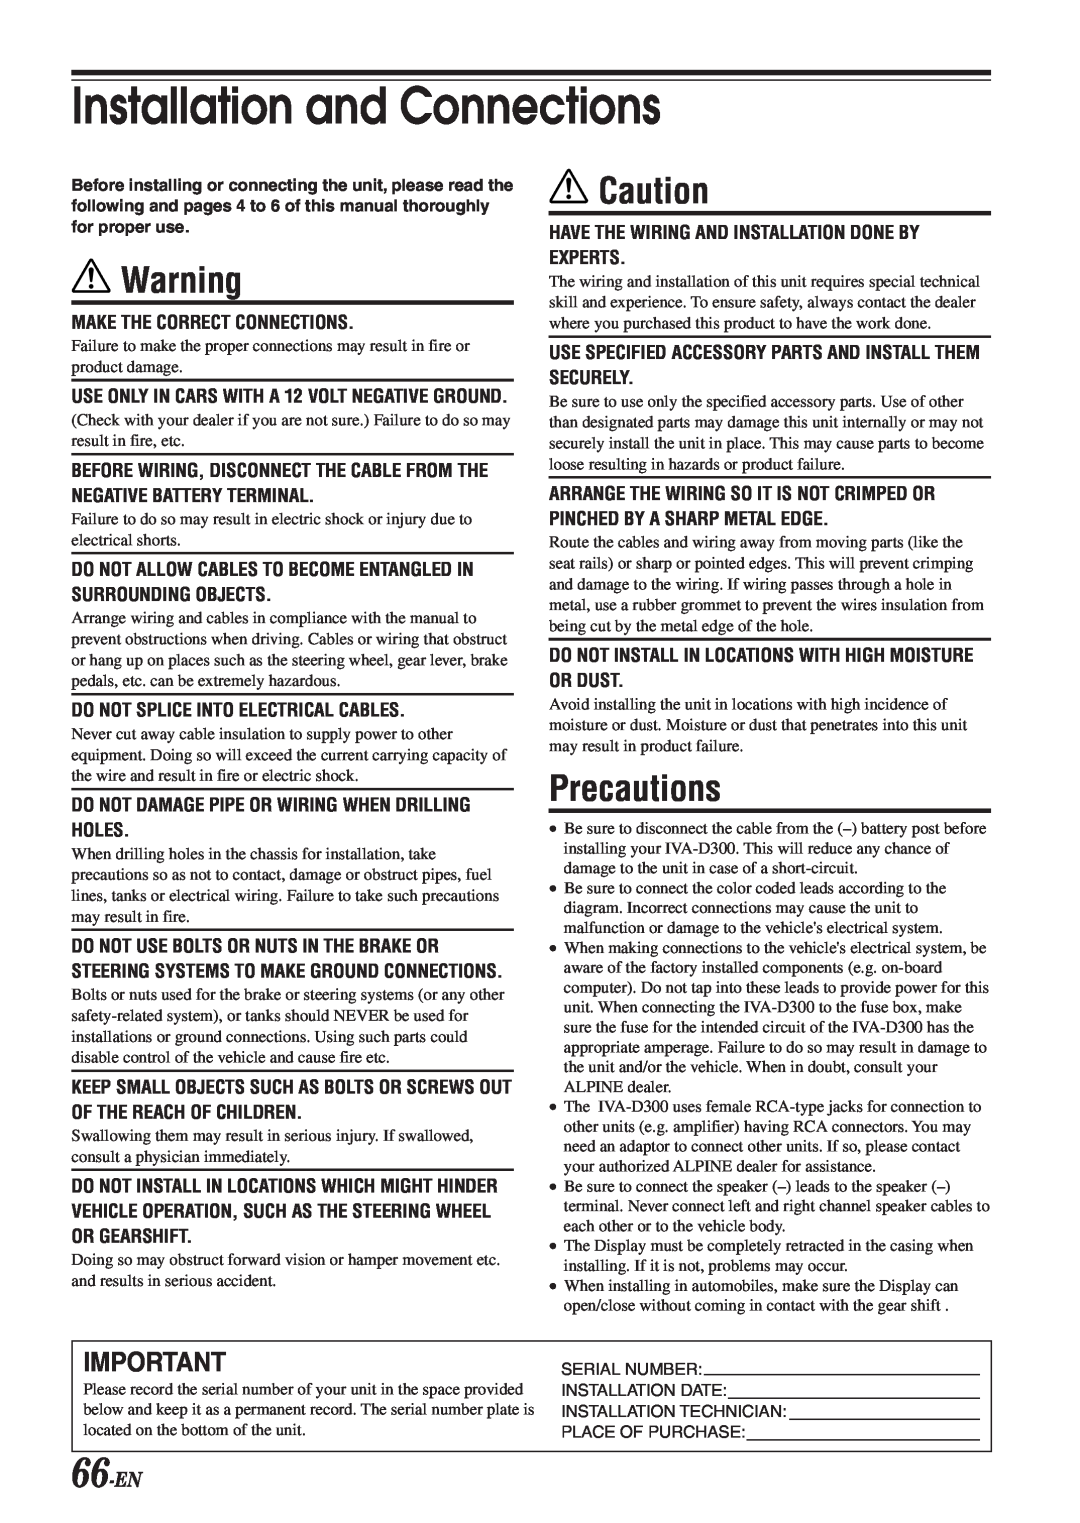 Alpine IVA-D300 owner manual Precautions, 66-EN, Installation and Connections 